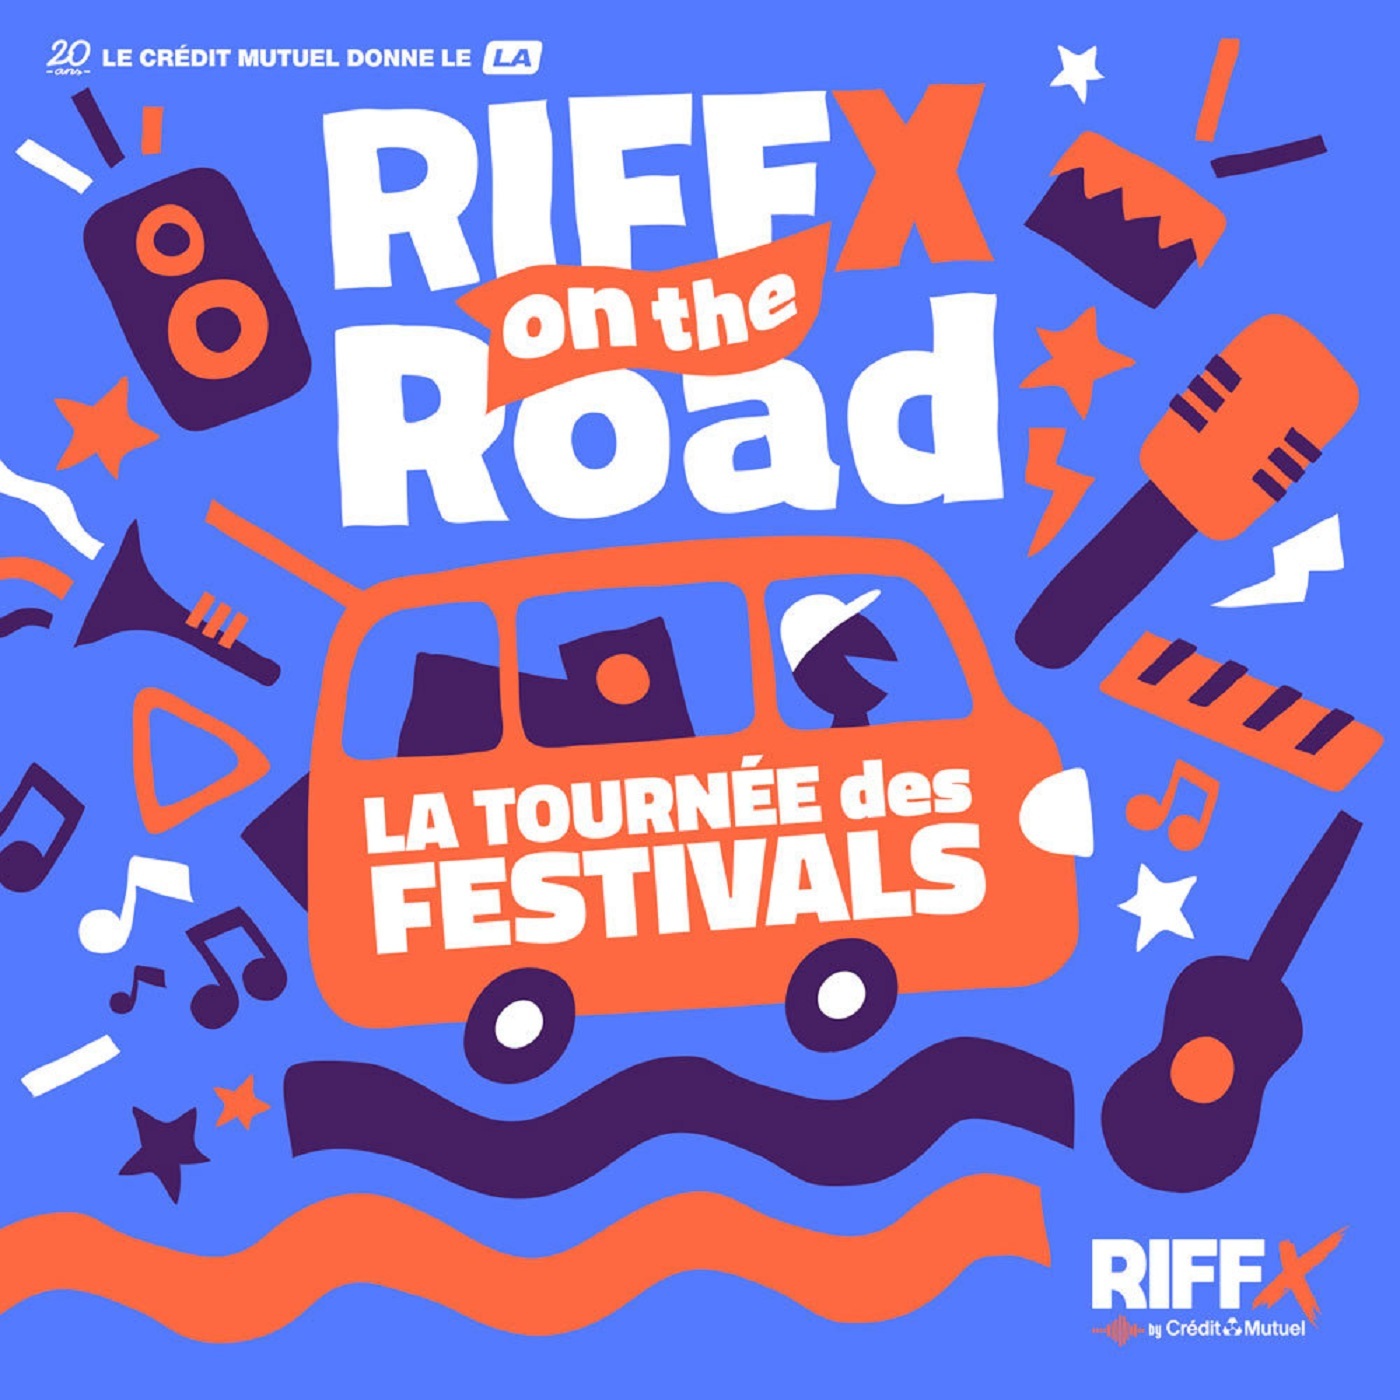 RIFFX on the Road